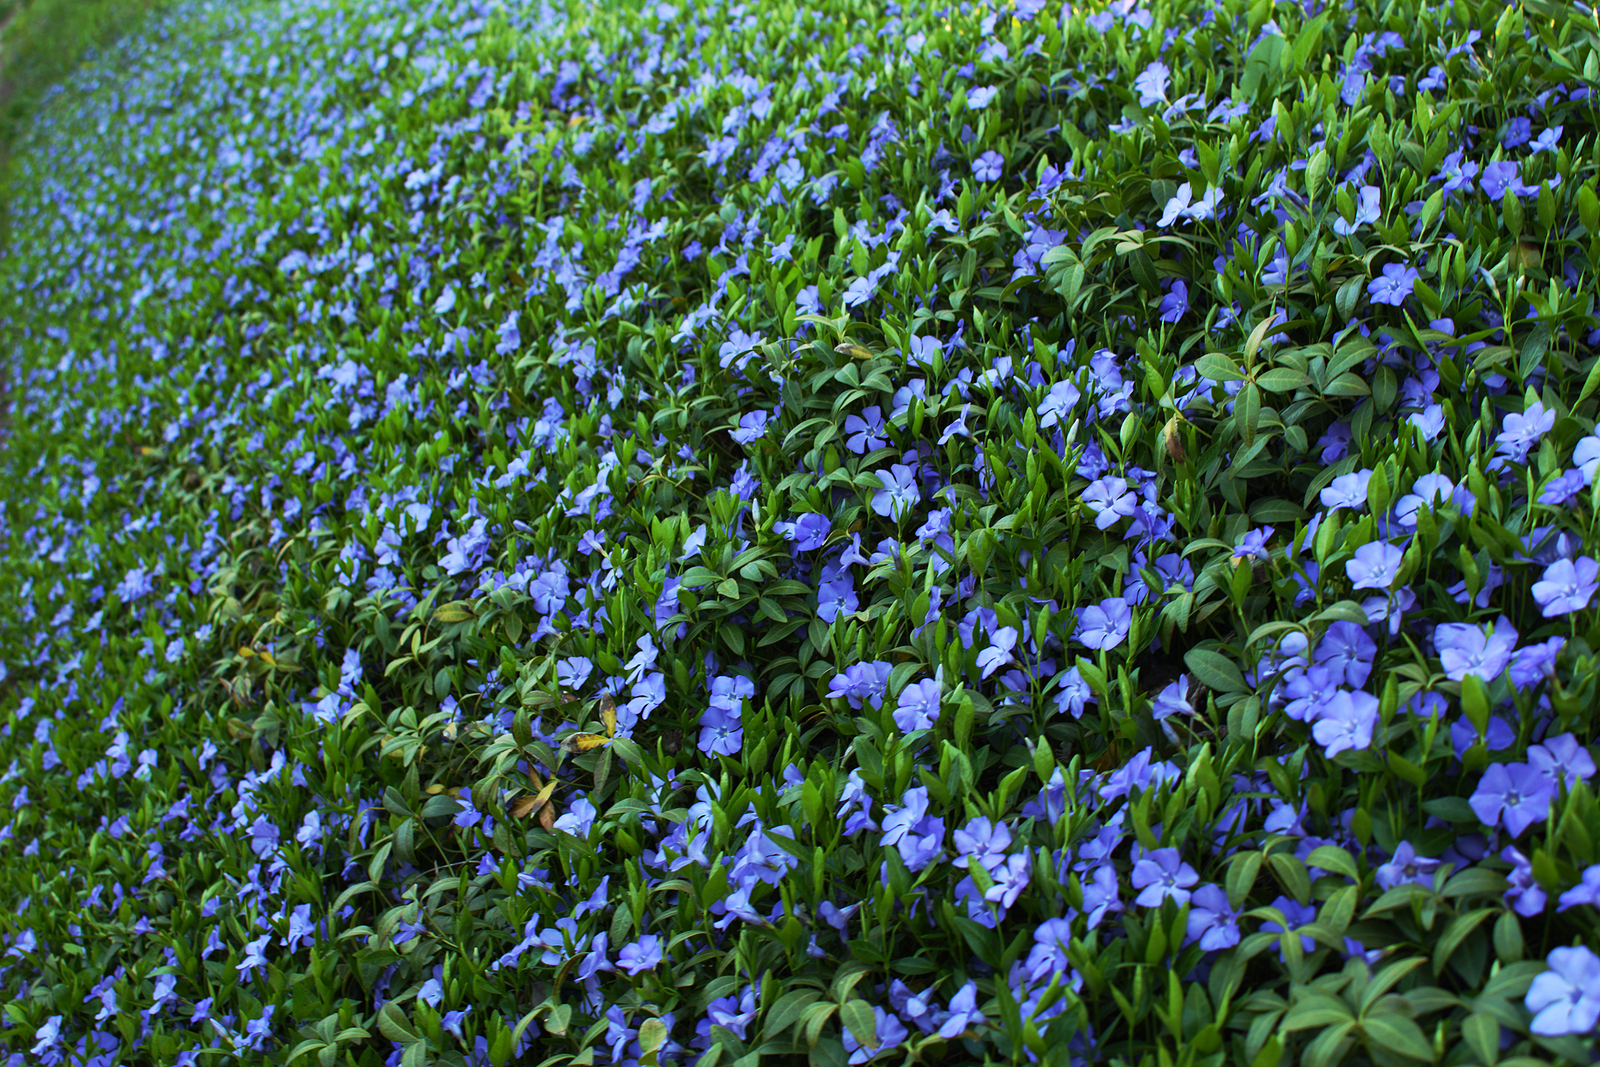 Close up image of a sloped landscape covered with with Vinca minor or periwinkle, a great option to prevent erosion as part of our erosion control services.